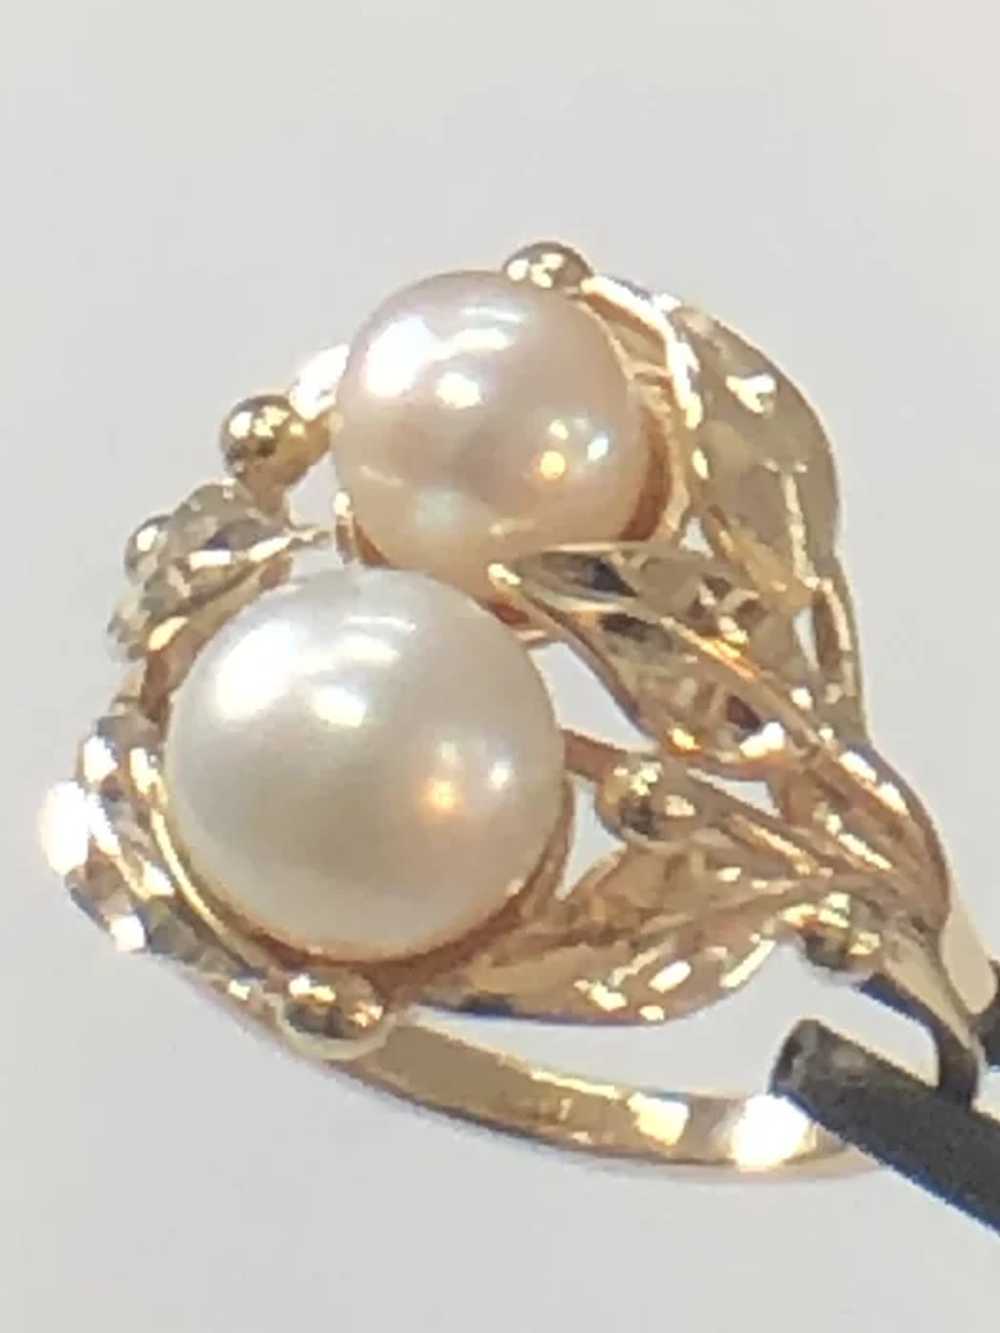 Double Pearl Ring - image 2